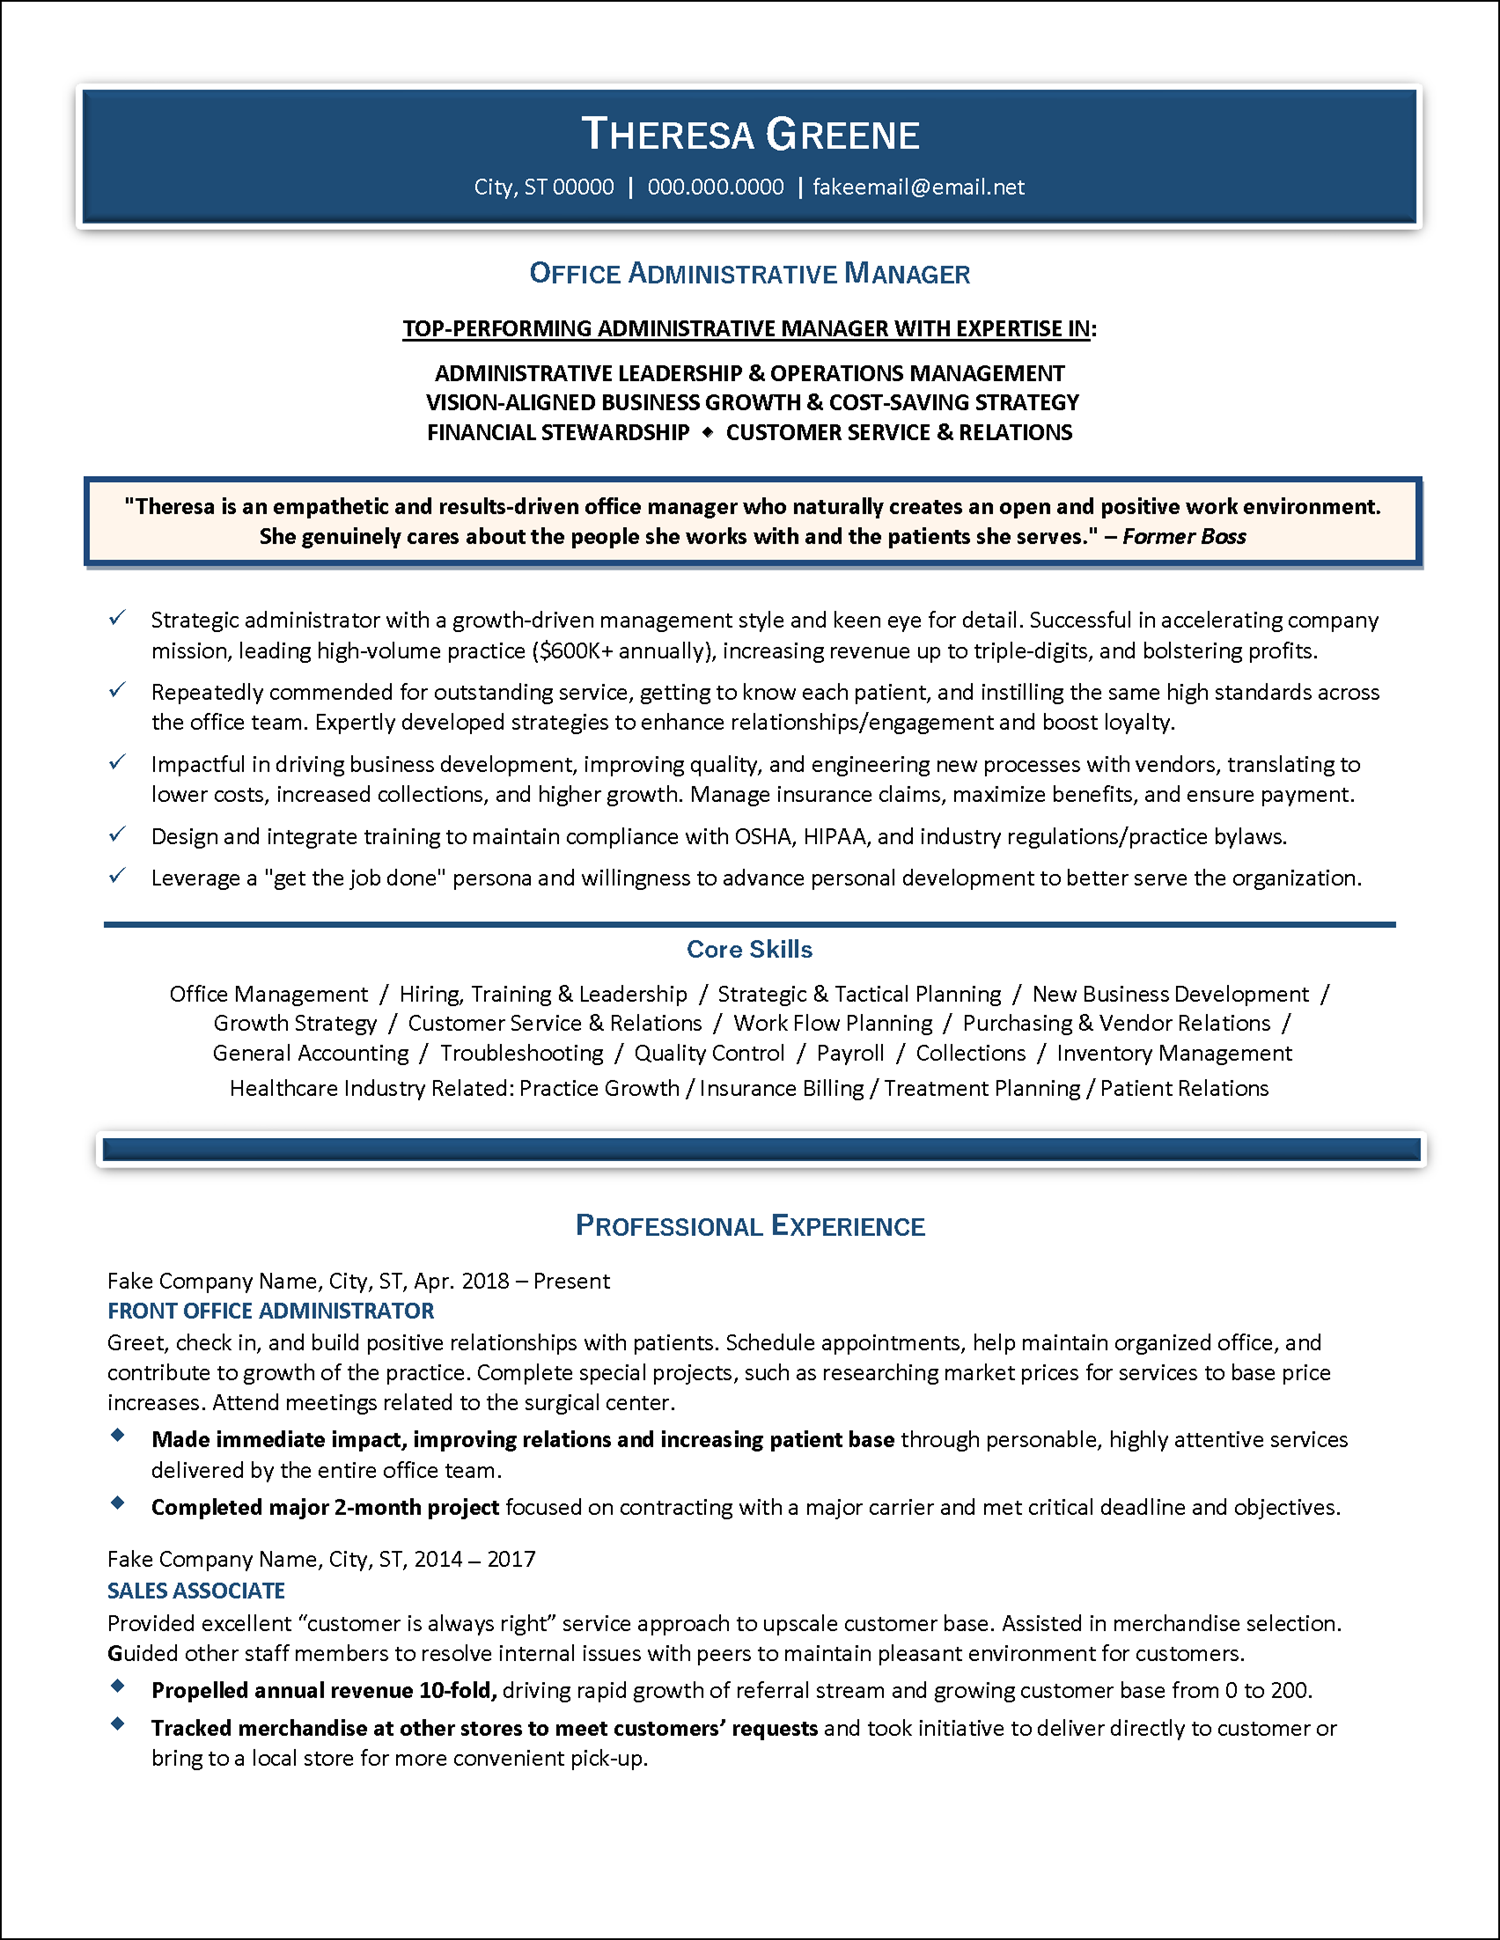 Example office administrative manager resume Page 1